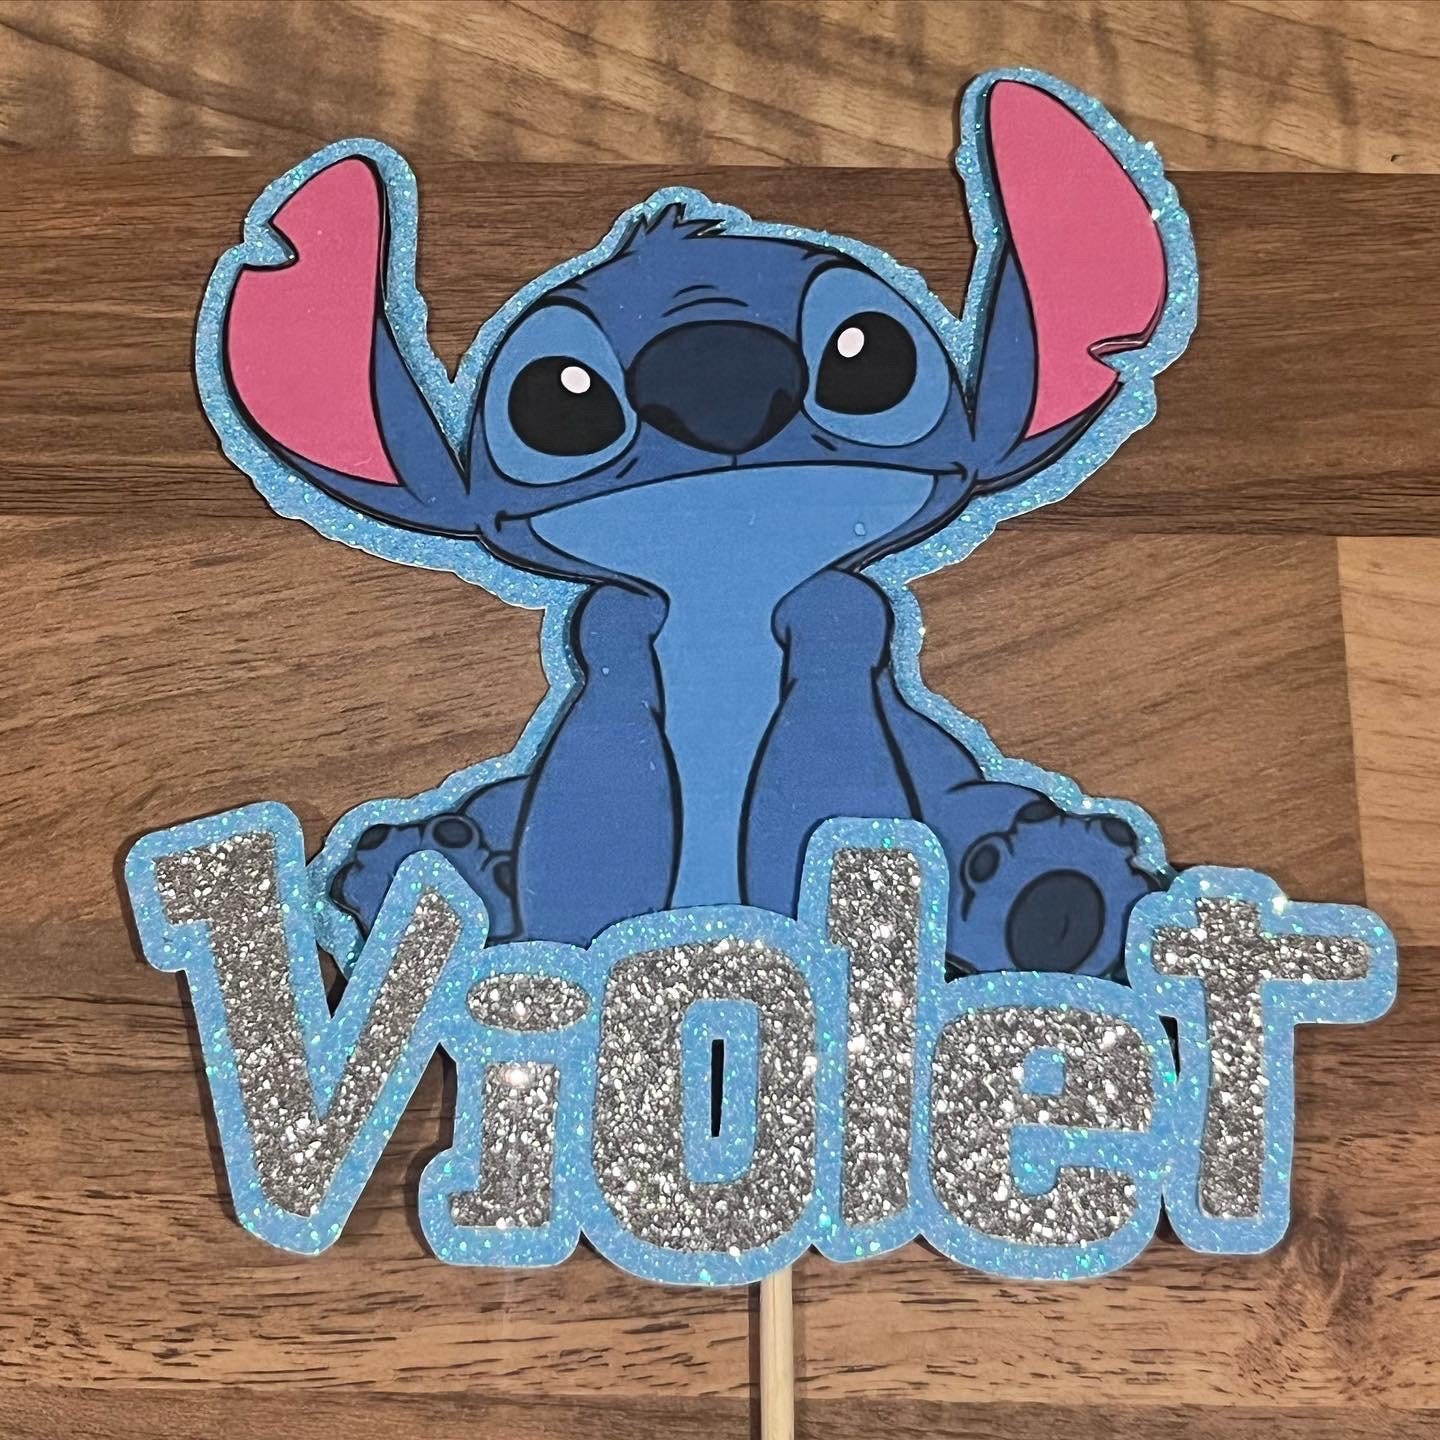 Personalized Stitch Night Light and First Name Stitch Gift Idea for  Children's Room, Bedside Lamp Decoration LED Luminous Acrylic Wood 